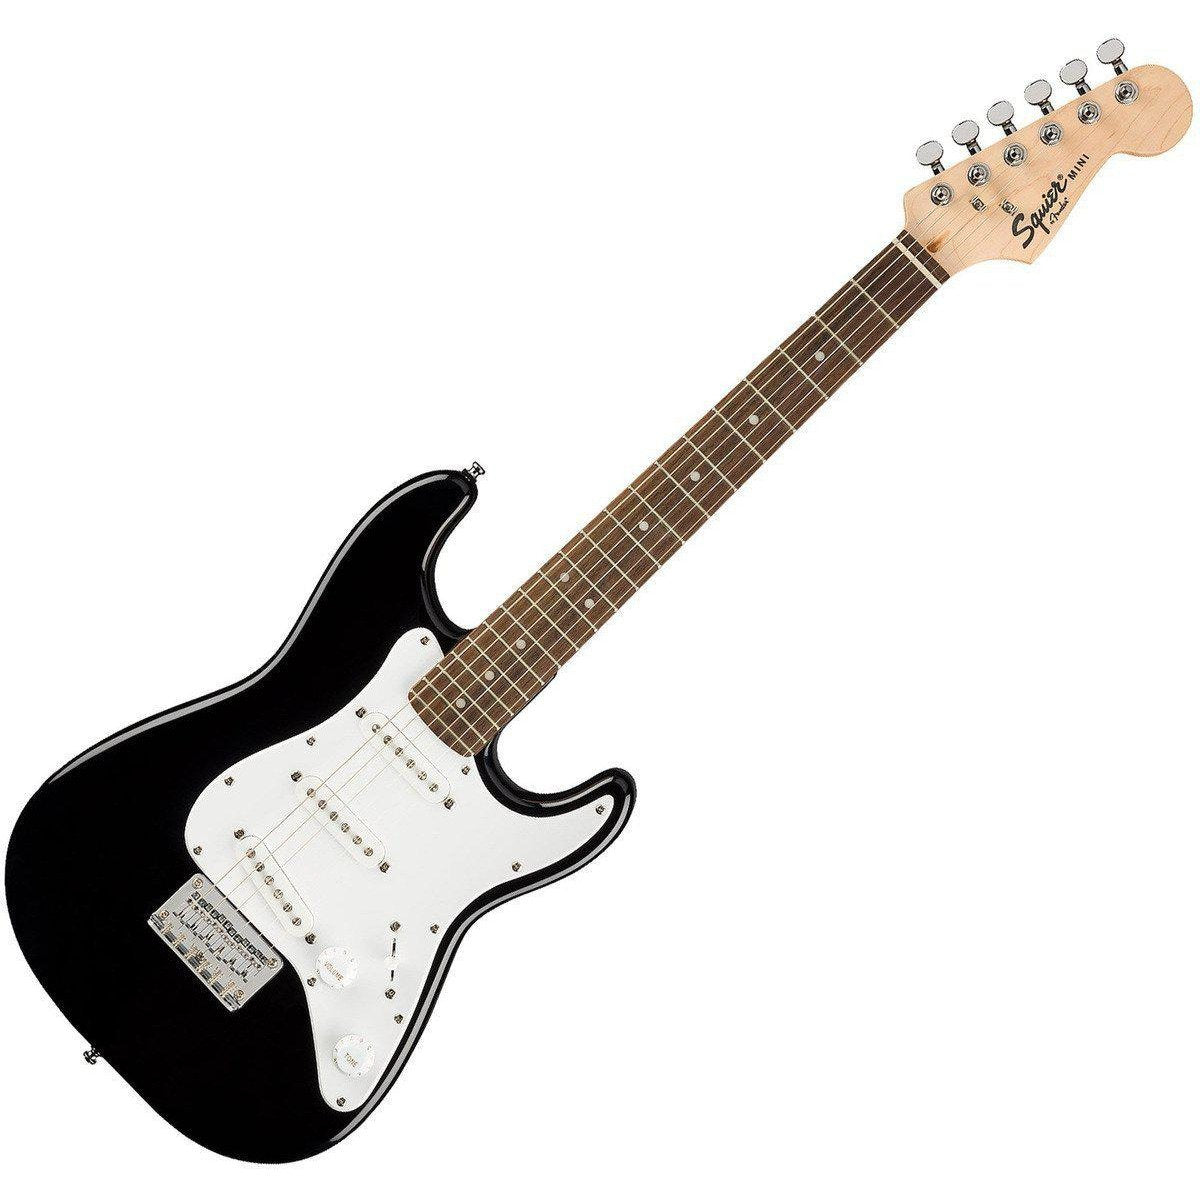 Gently Used Squier Mini Stratocaster 3/4 Size Electric Guitar Black *Mint Condition*-Andy's Music